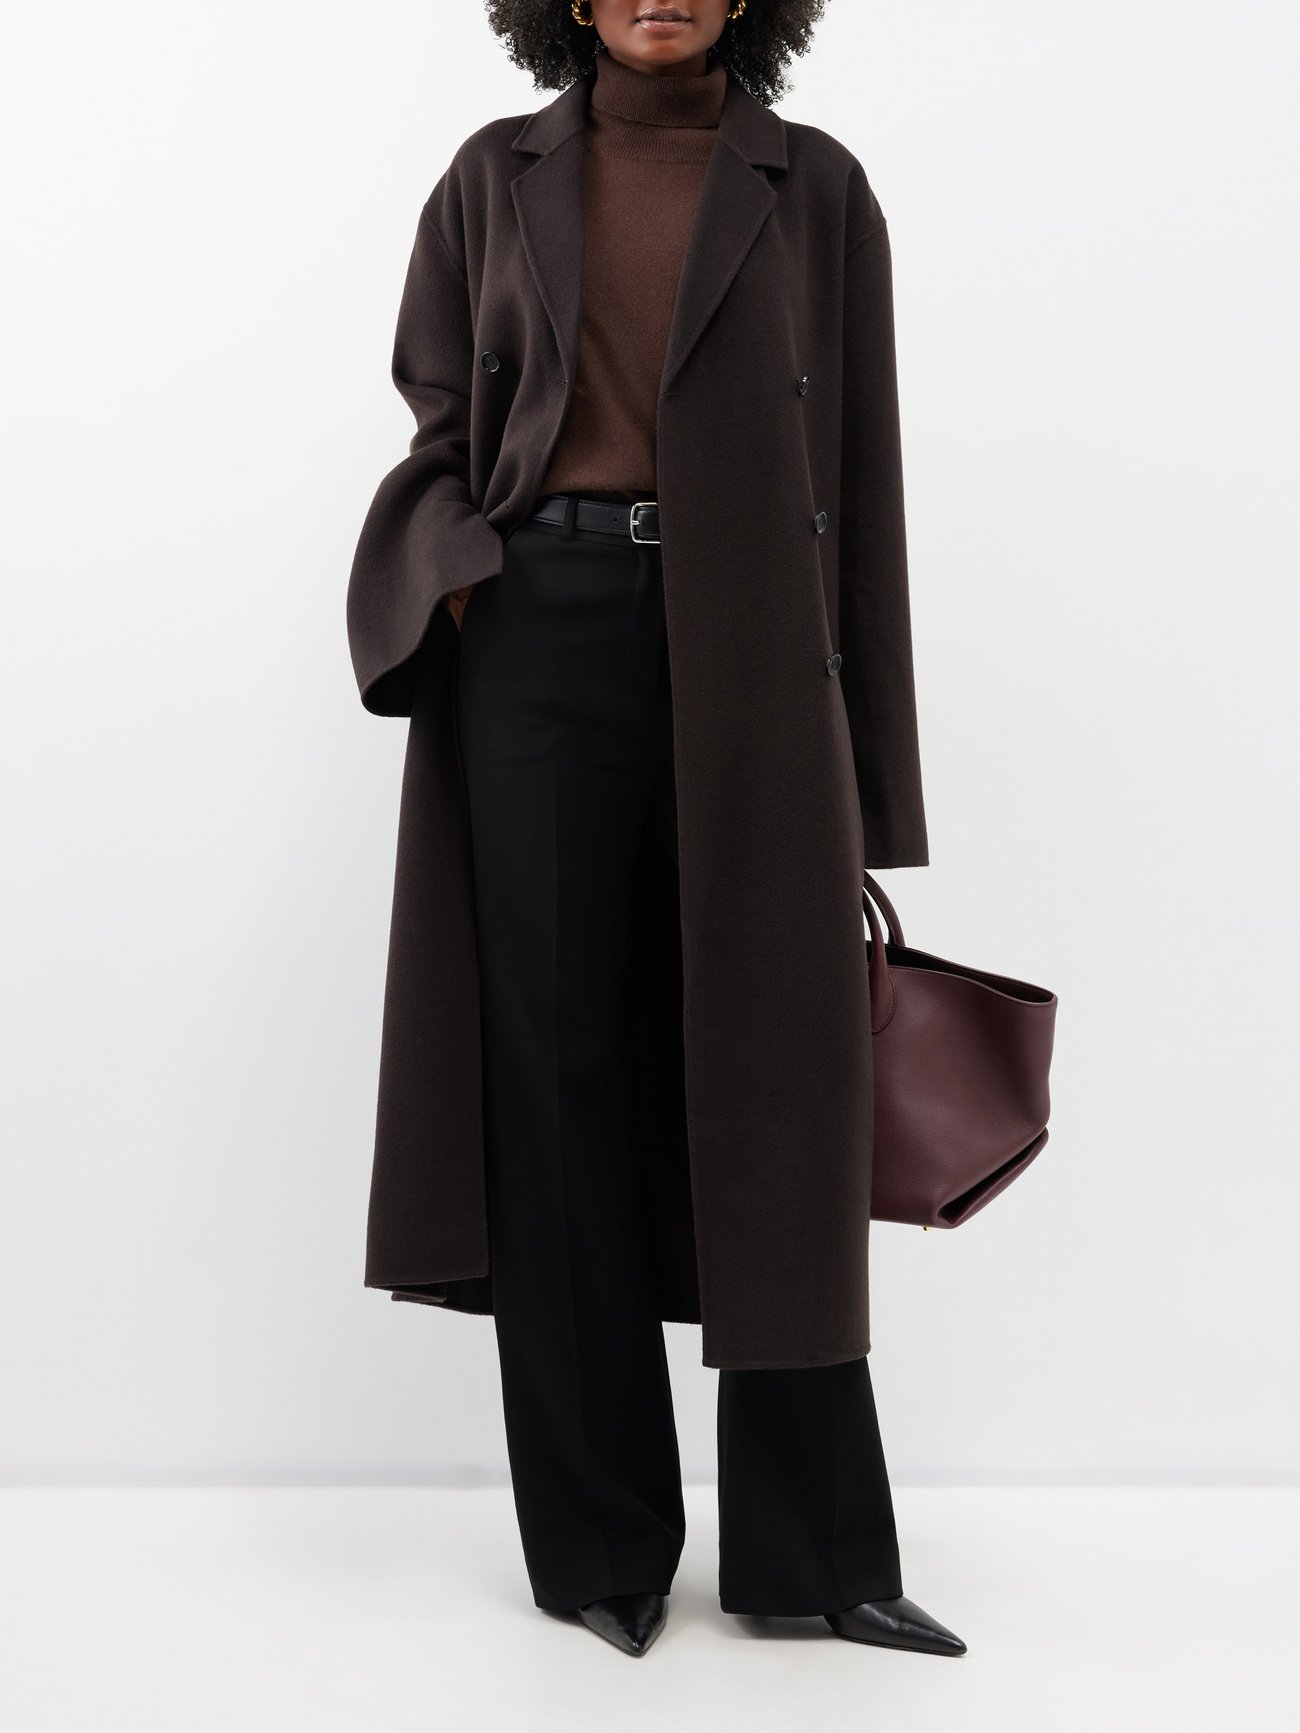 Toteme's dark brown Signature coat is tailored to a menswear-inspired silhouette from pressed RWS-certified wool with a slightly oversized double-breasted frame.